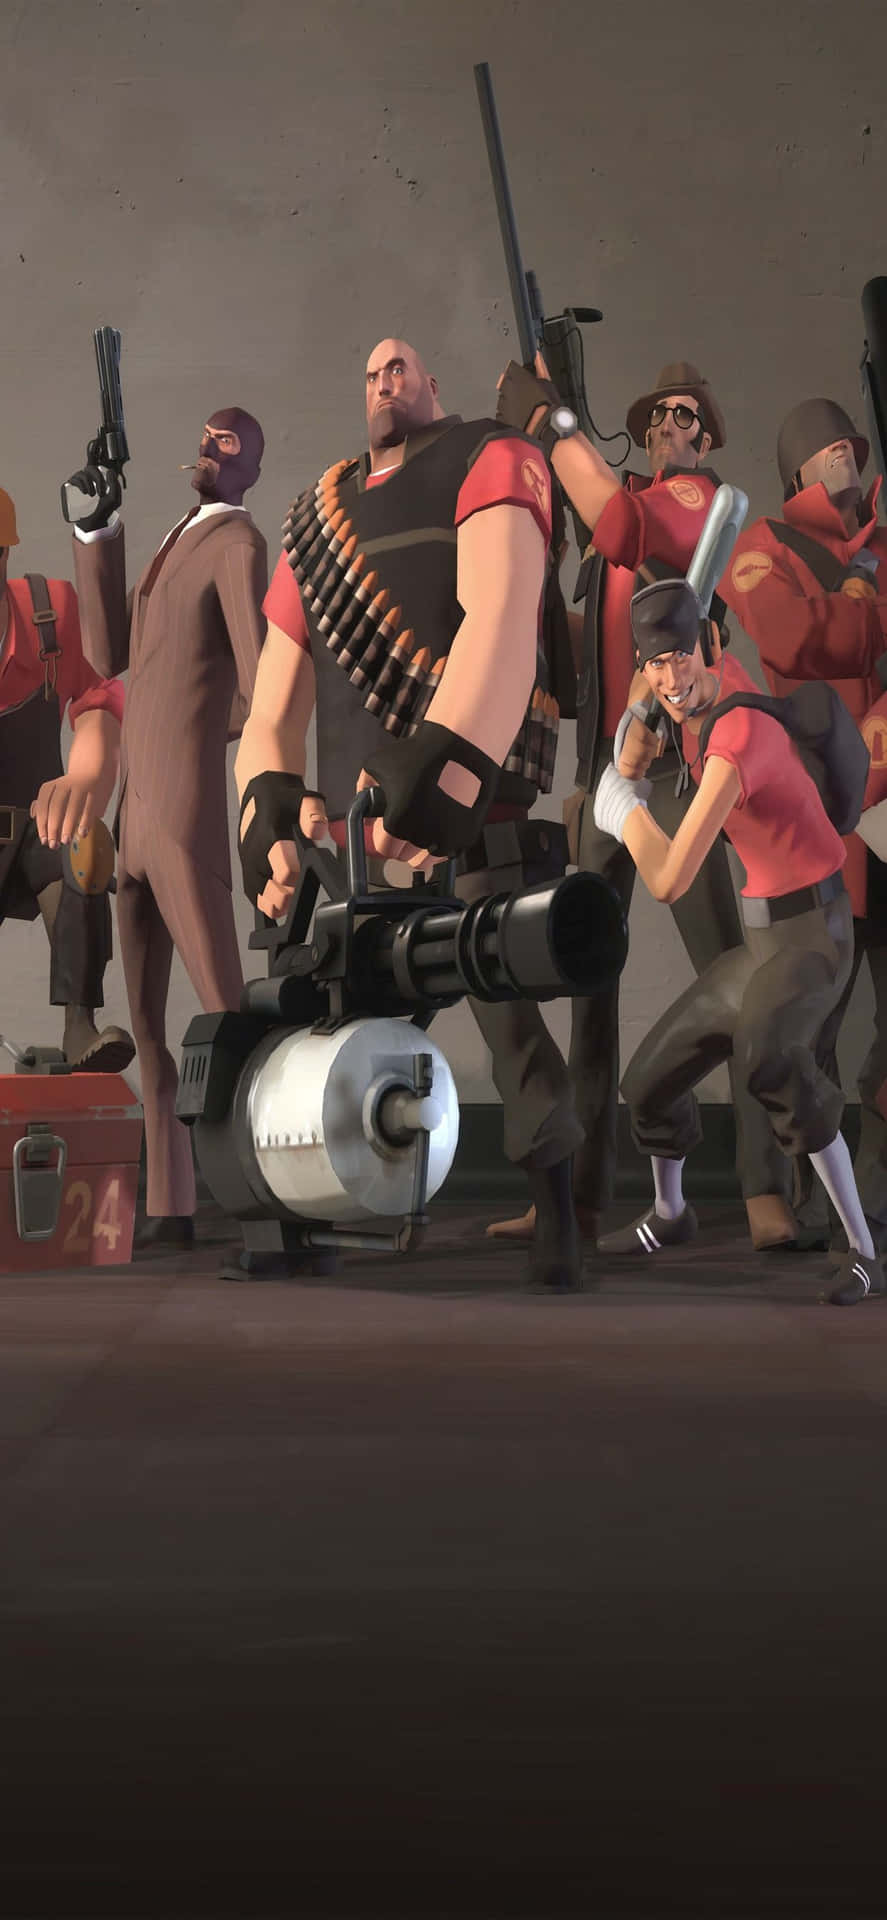 Iphone Xs Max Tf2 Background Wallpaper